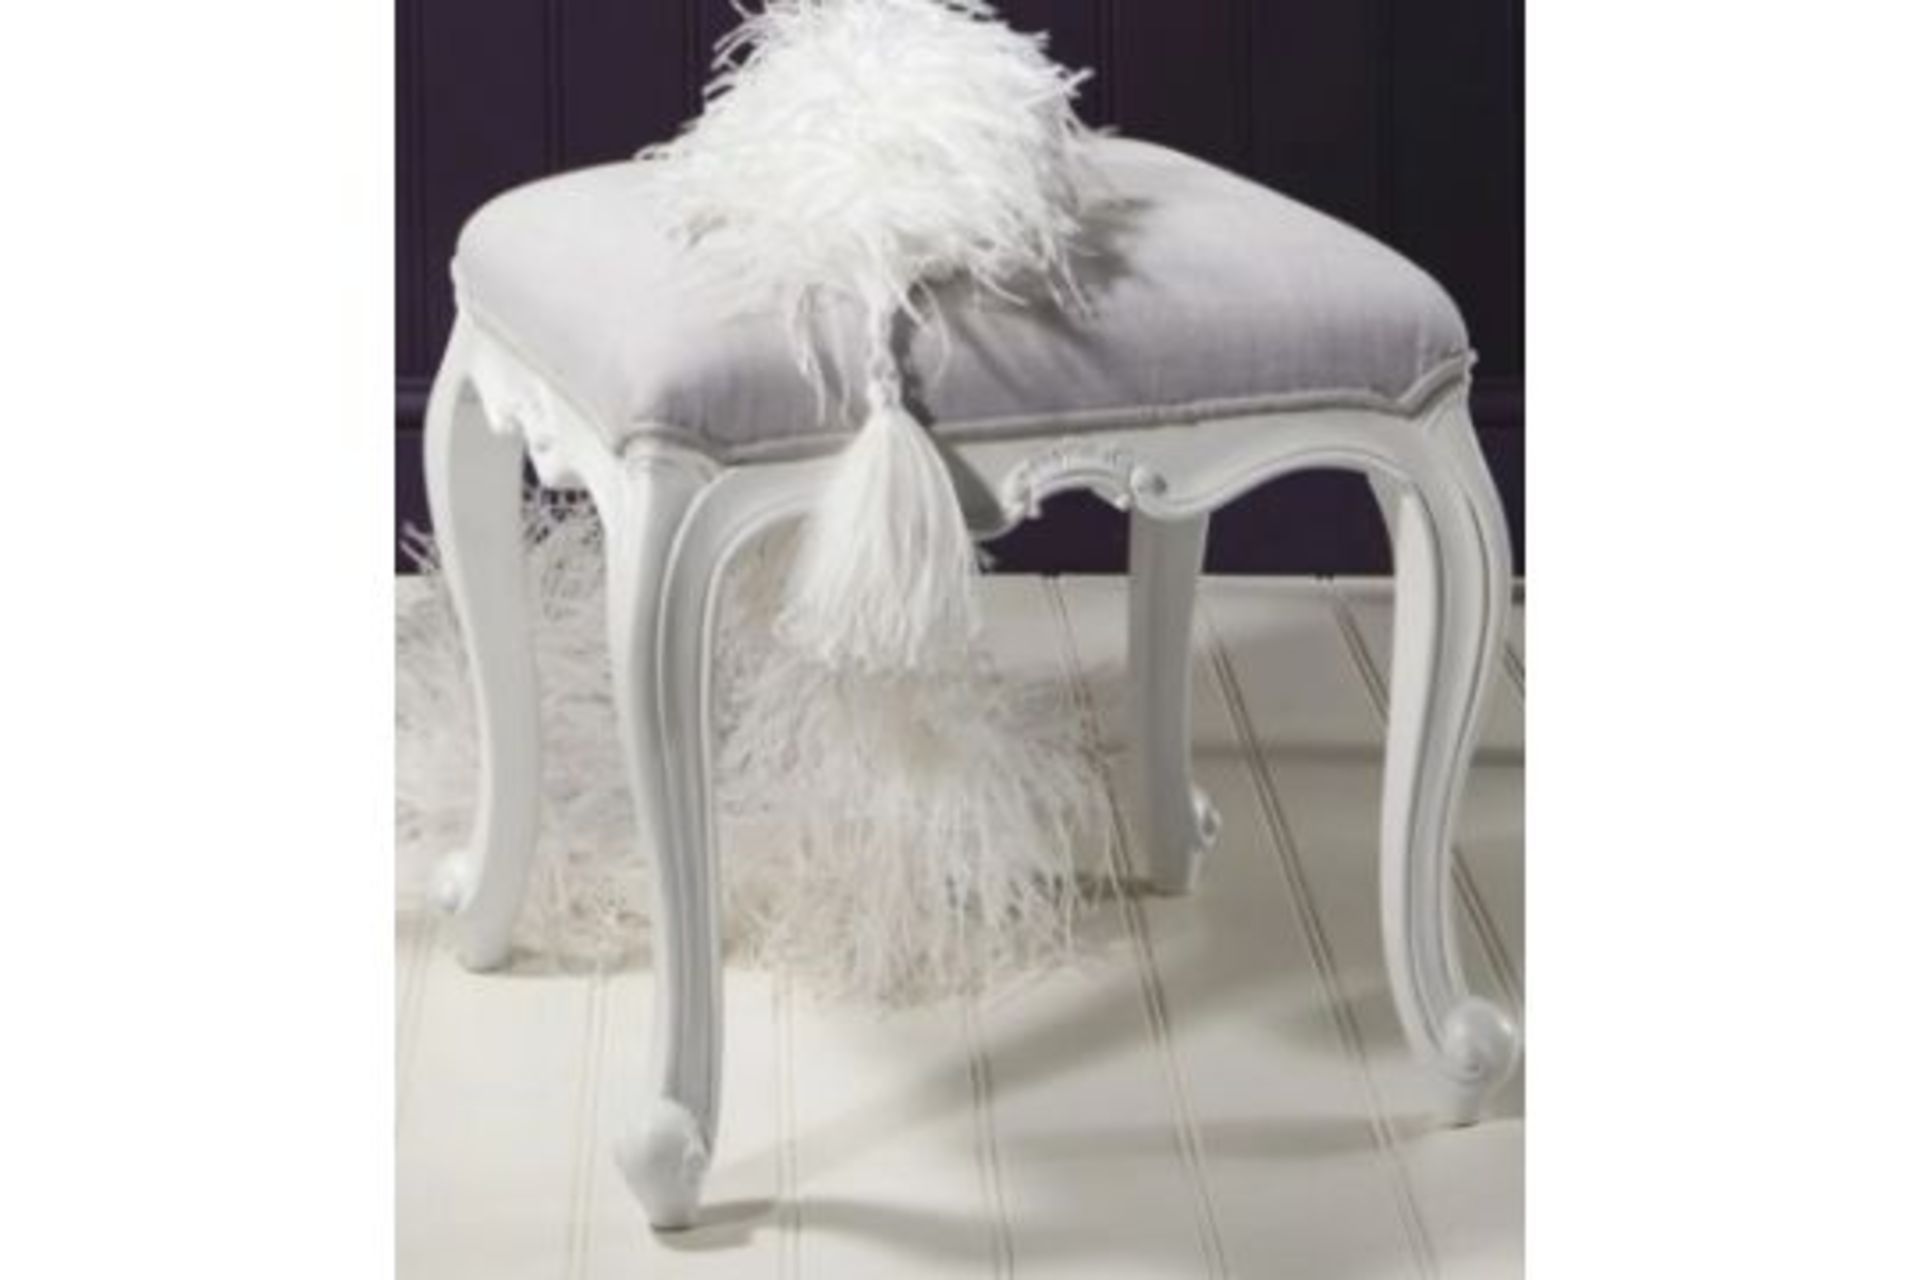 Chic Dressing Stool, Vanilla White Applied By Hand , The Calming Vanilla White Paint Adds A Feminine